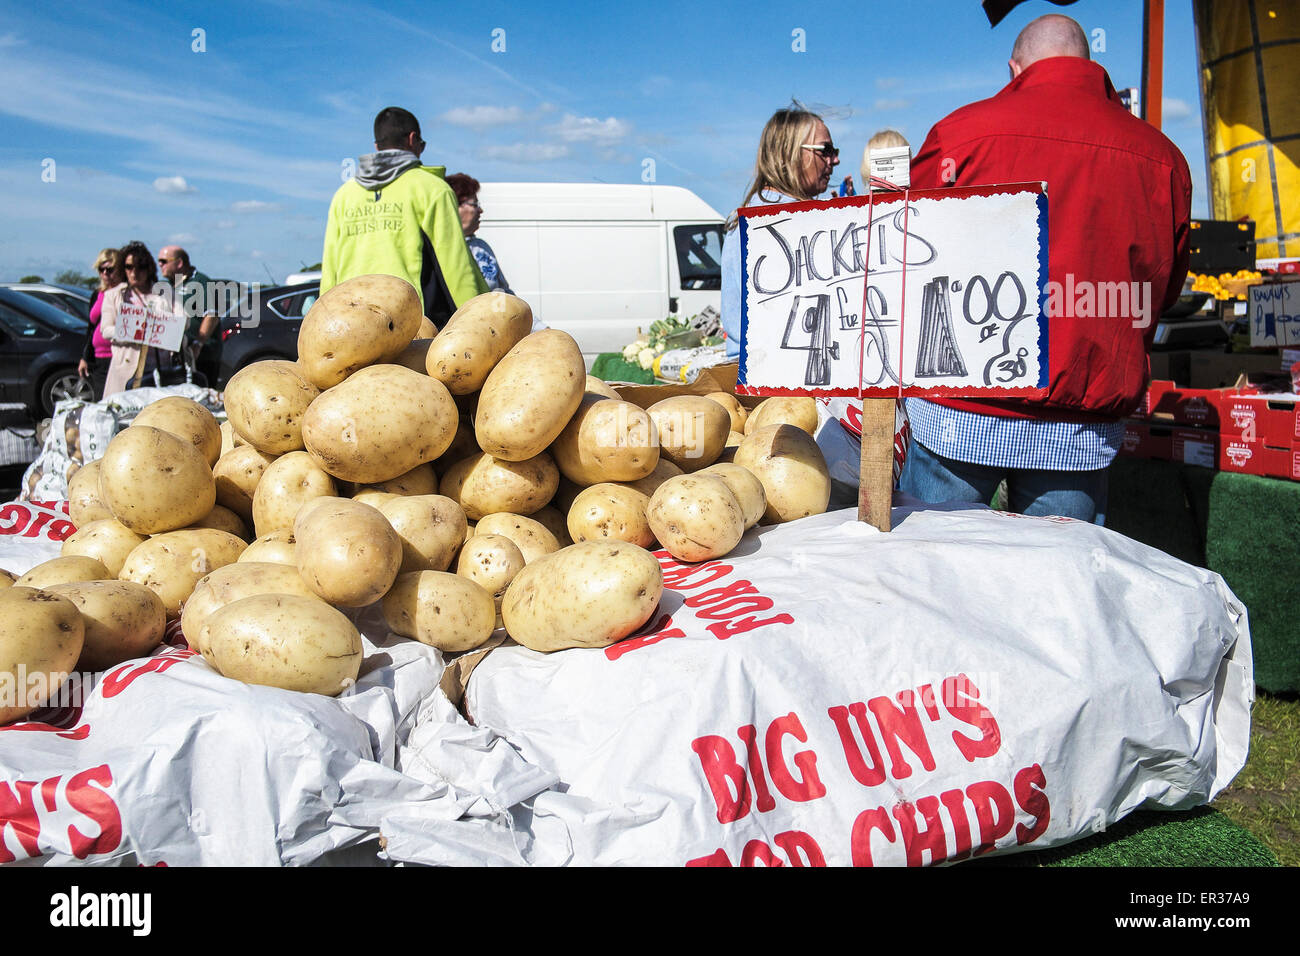 Potatoes on sale at a boot sale in Essex. Stock Photo